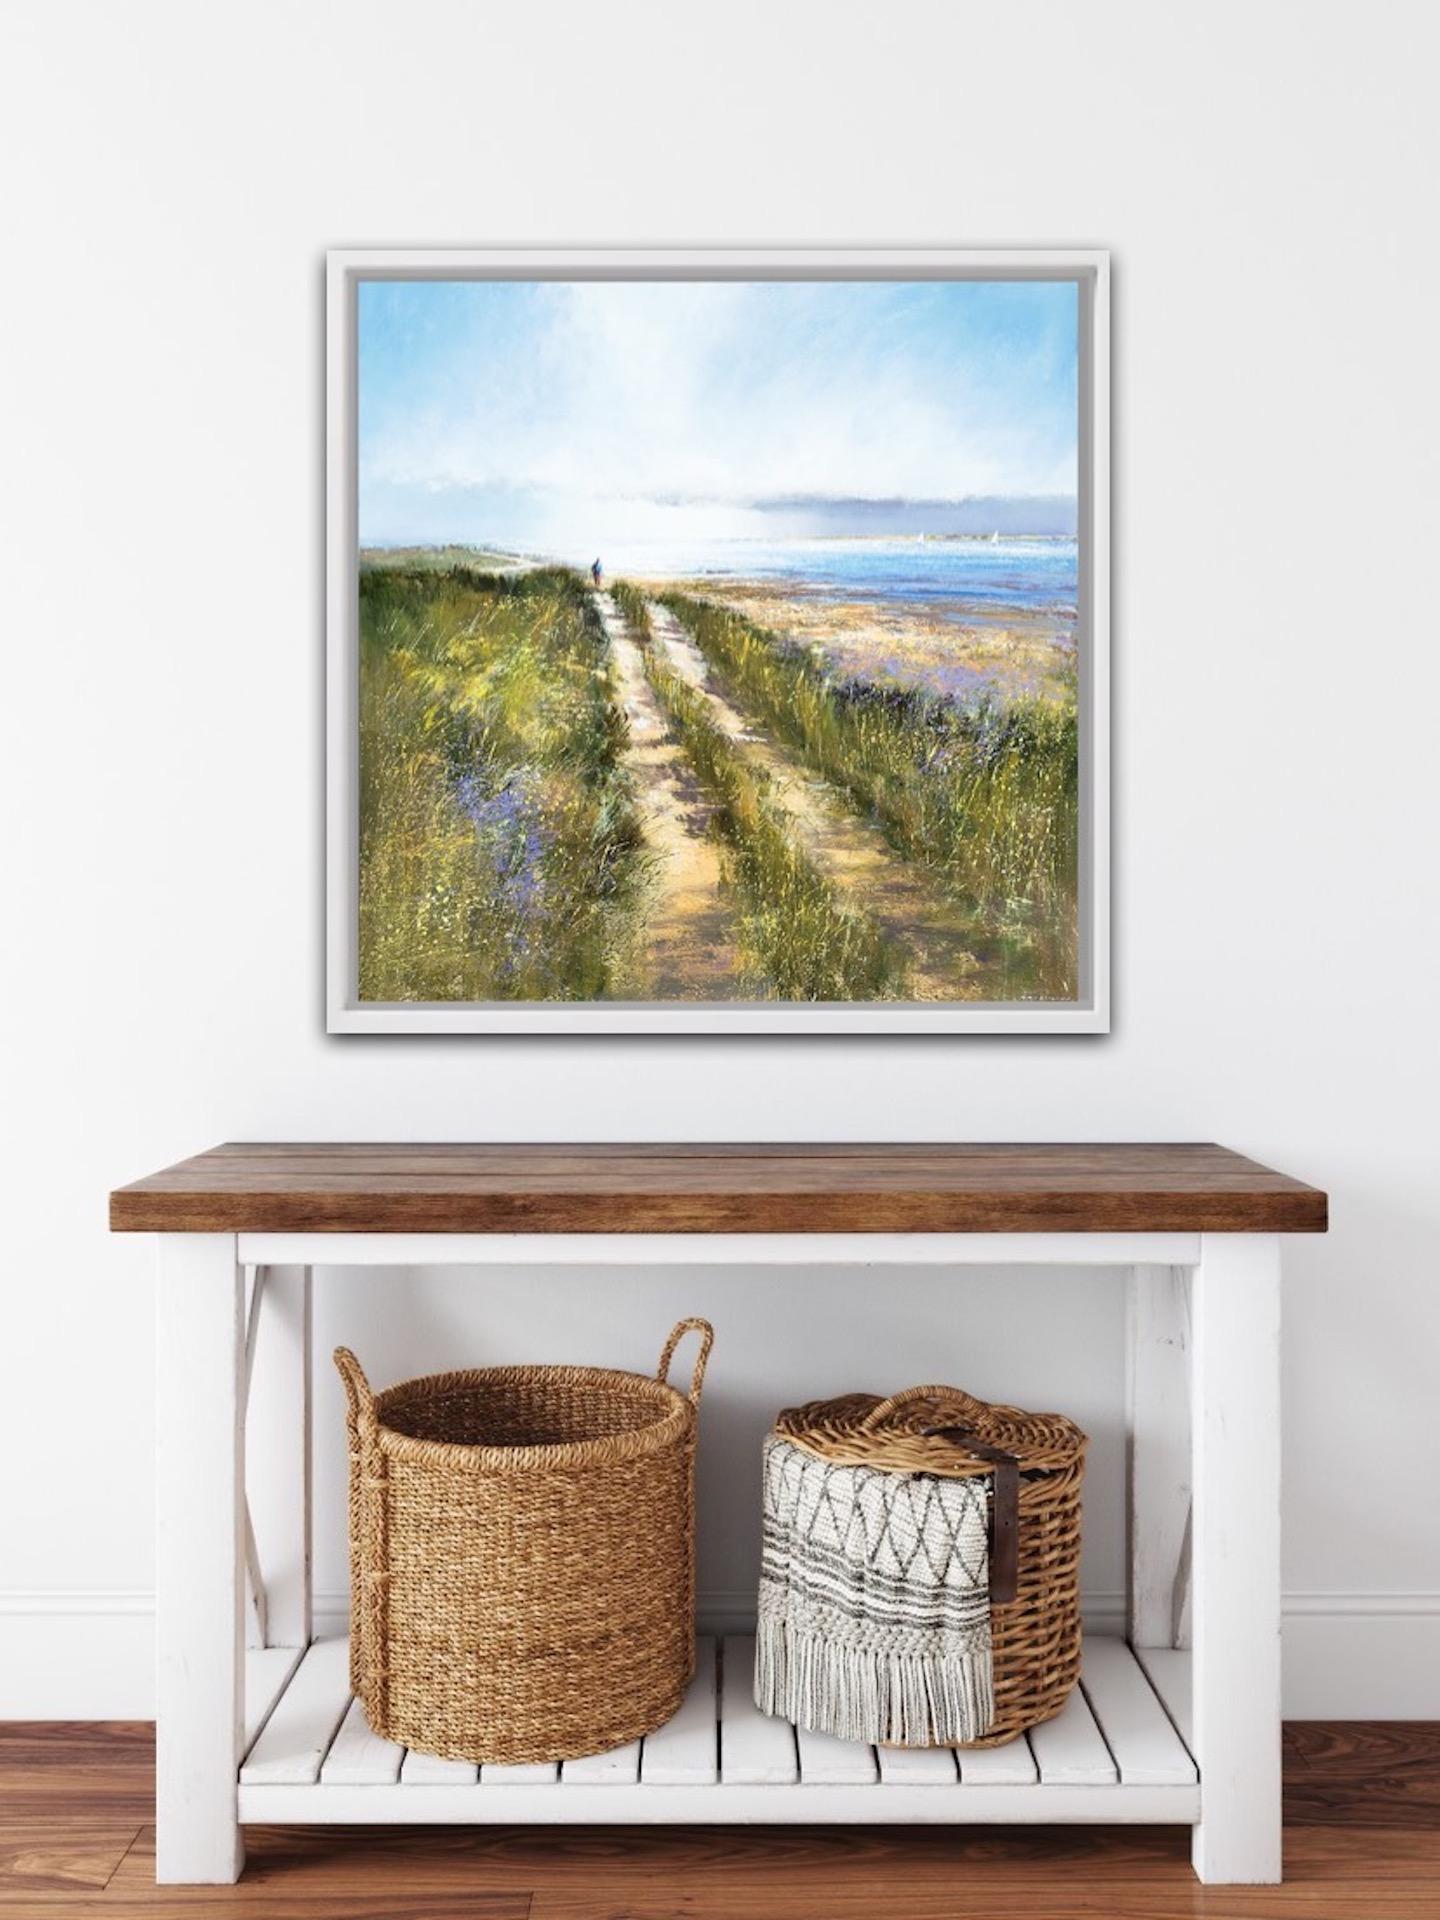 Michael Sanders.
From Blakeney
Limited Edition Canvas Print.
Edition of 250
The image size is 40x 40cm. 
The paper size is 60x60cm.
Sold Unframed
(Please note that in situ images are purely an indication of how a piece may look).